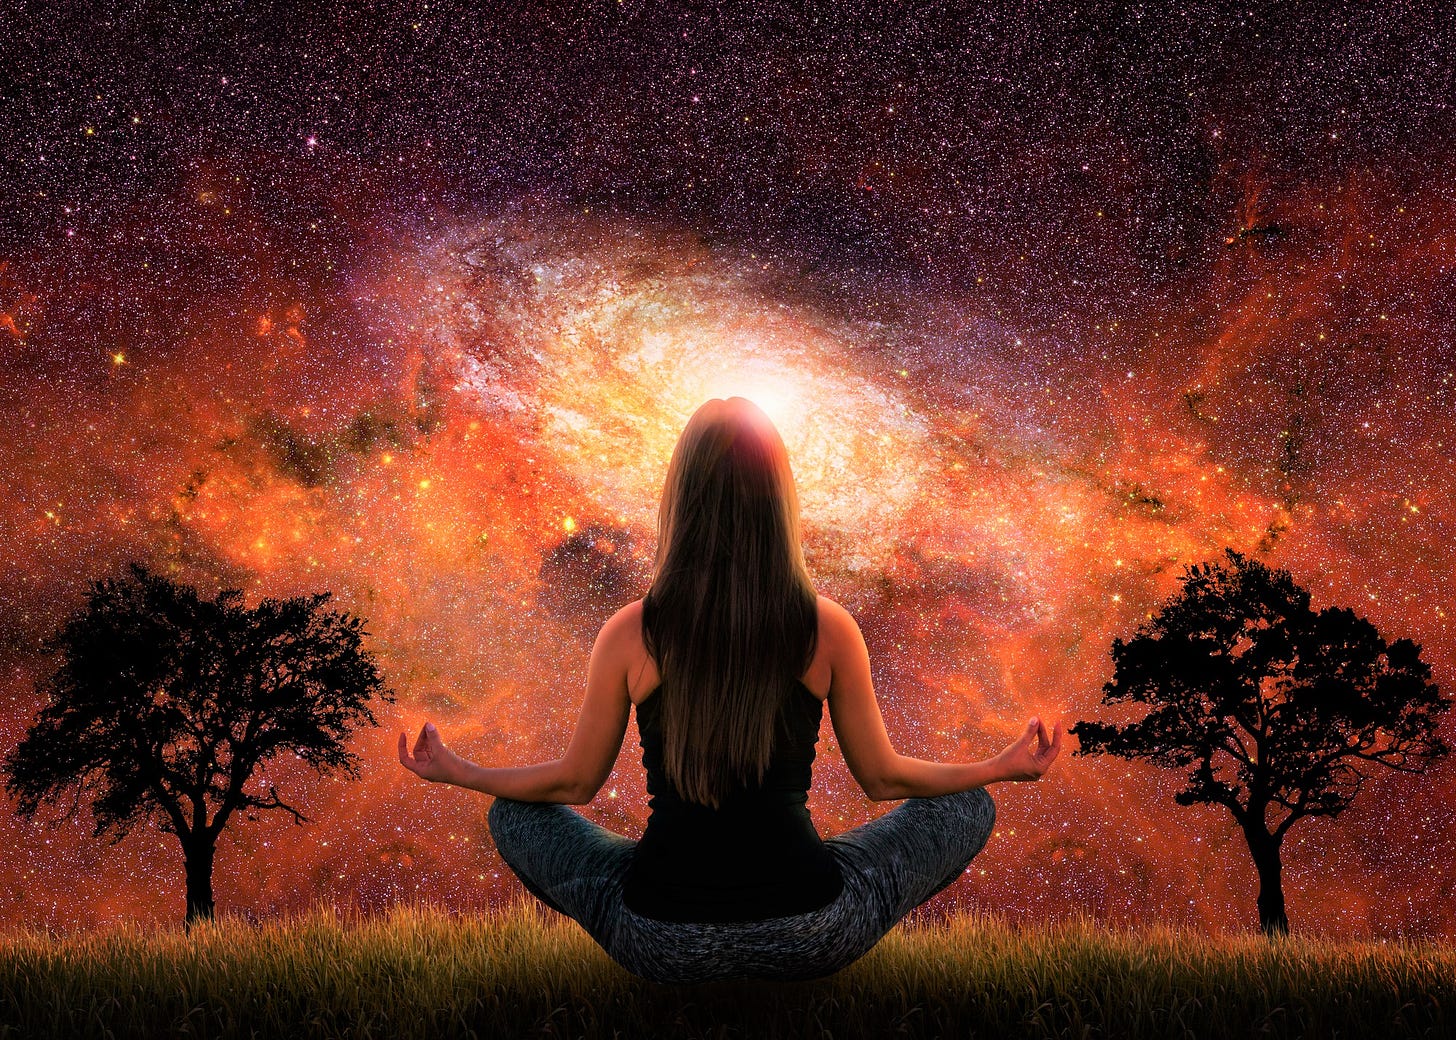 back view of girl with long dark hair in yoga pose looking at orange night sky